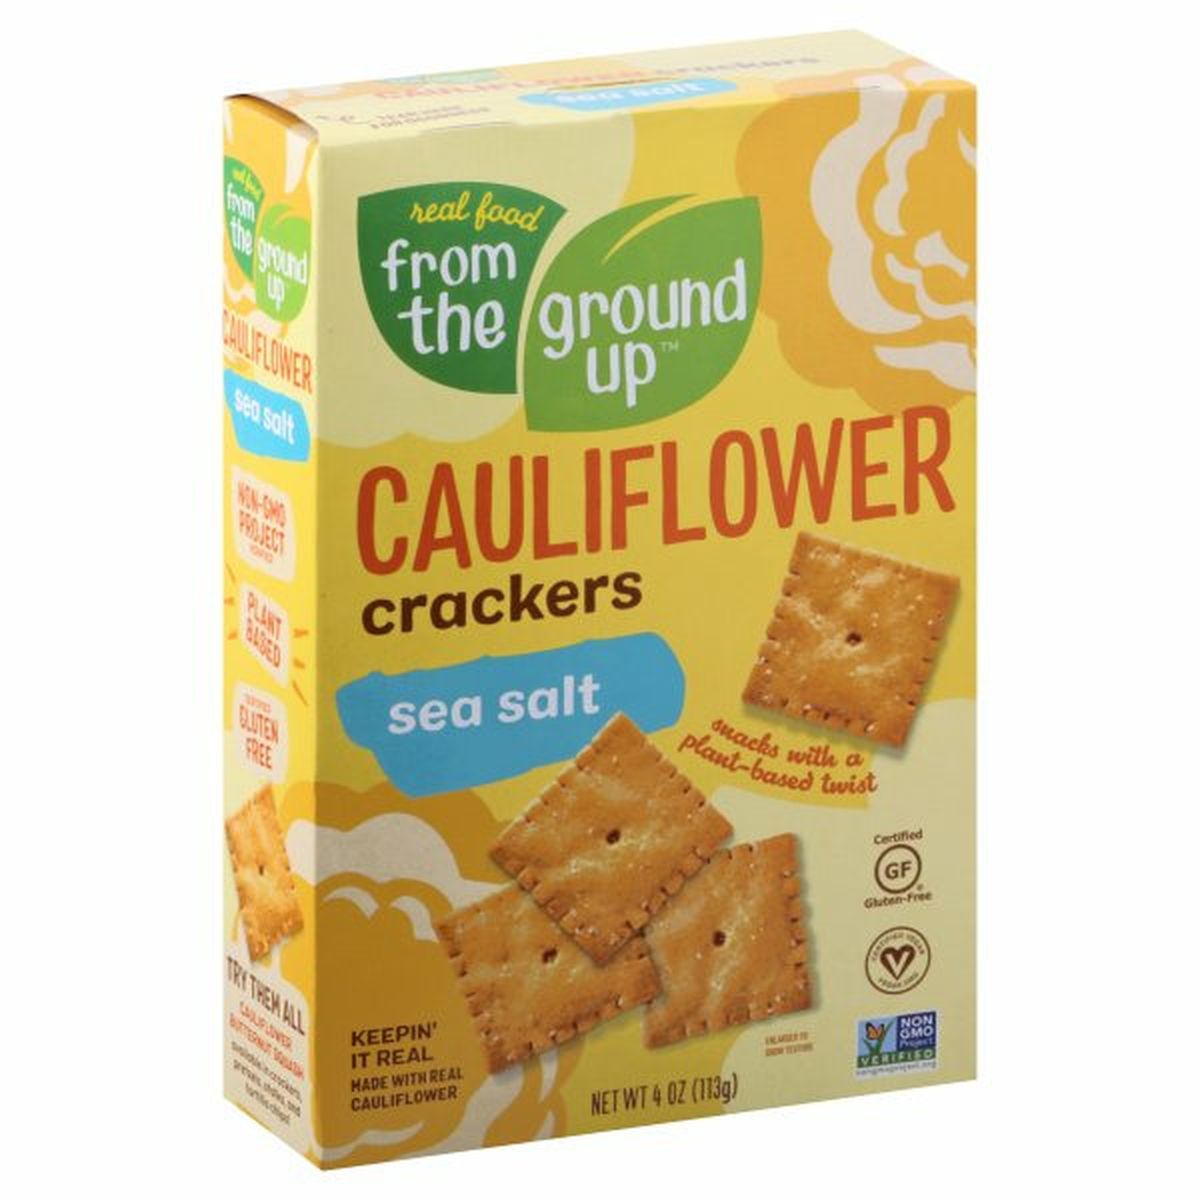 Calories in From the Ground Up Cauliflower Crackers, Sea Salt